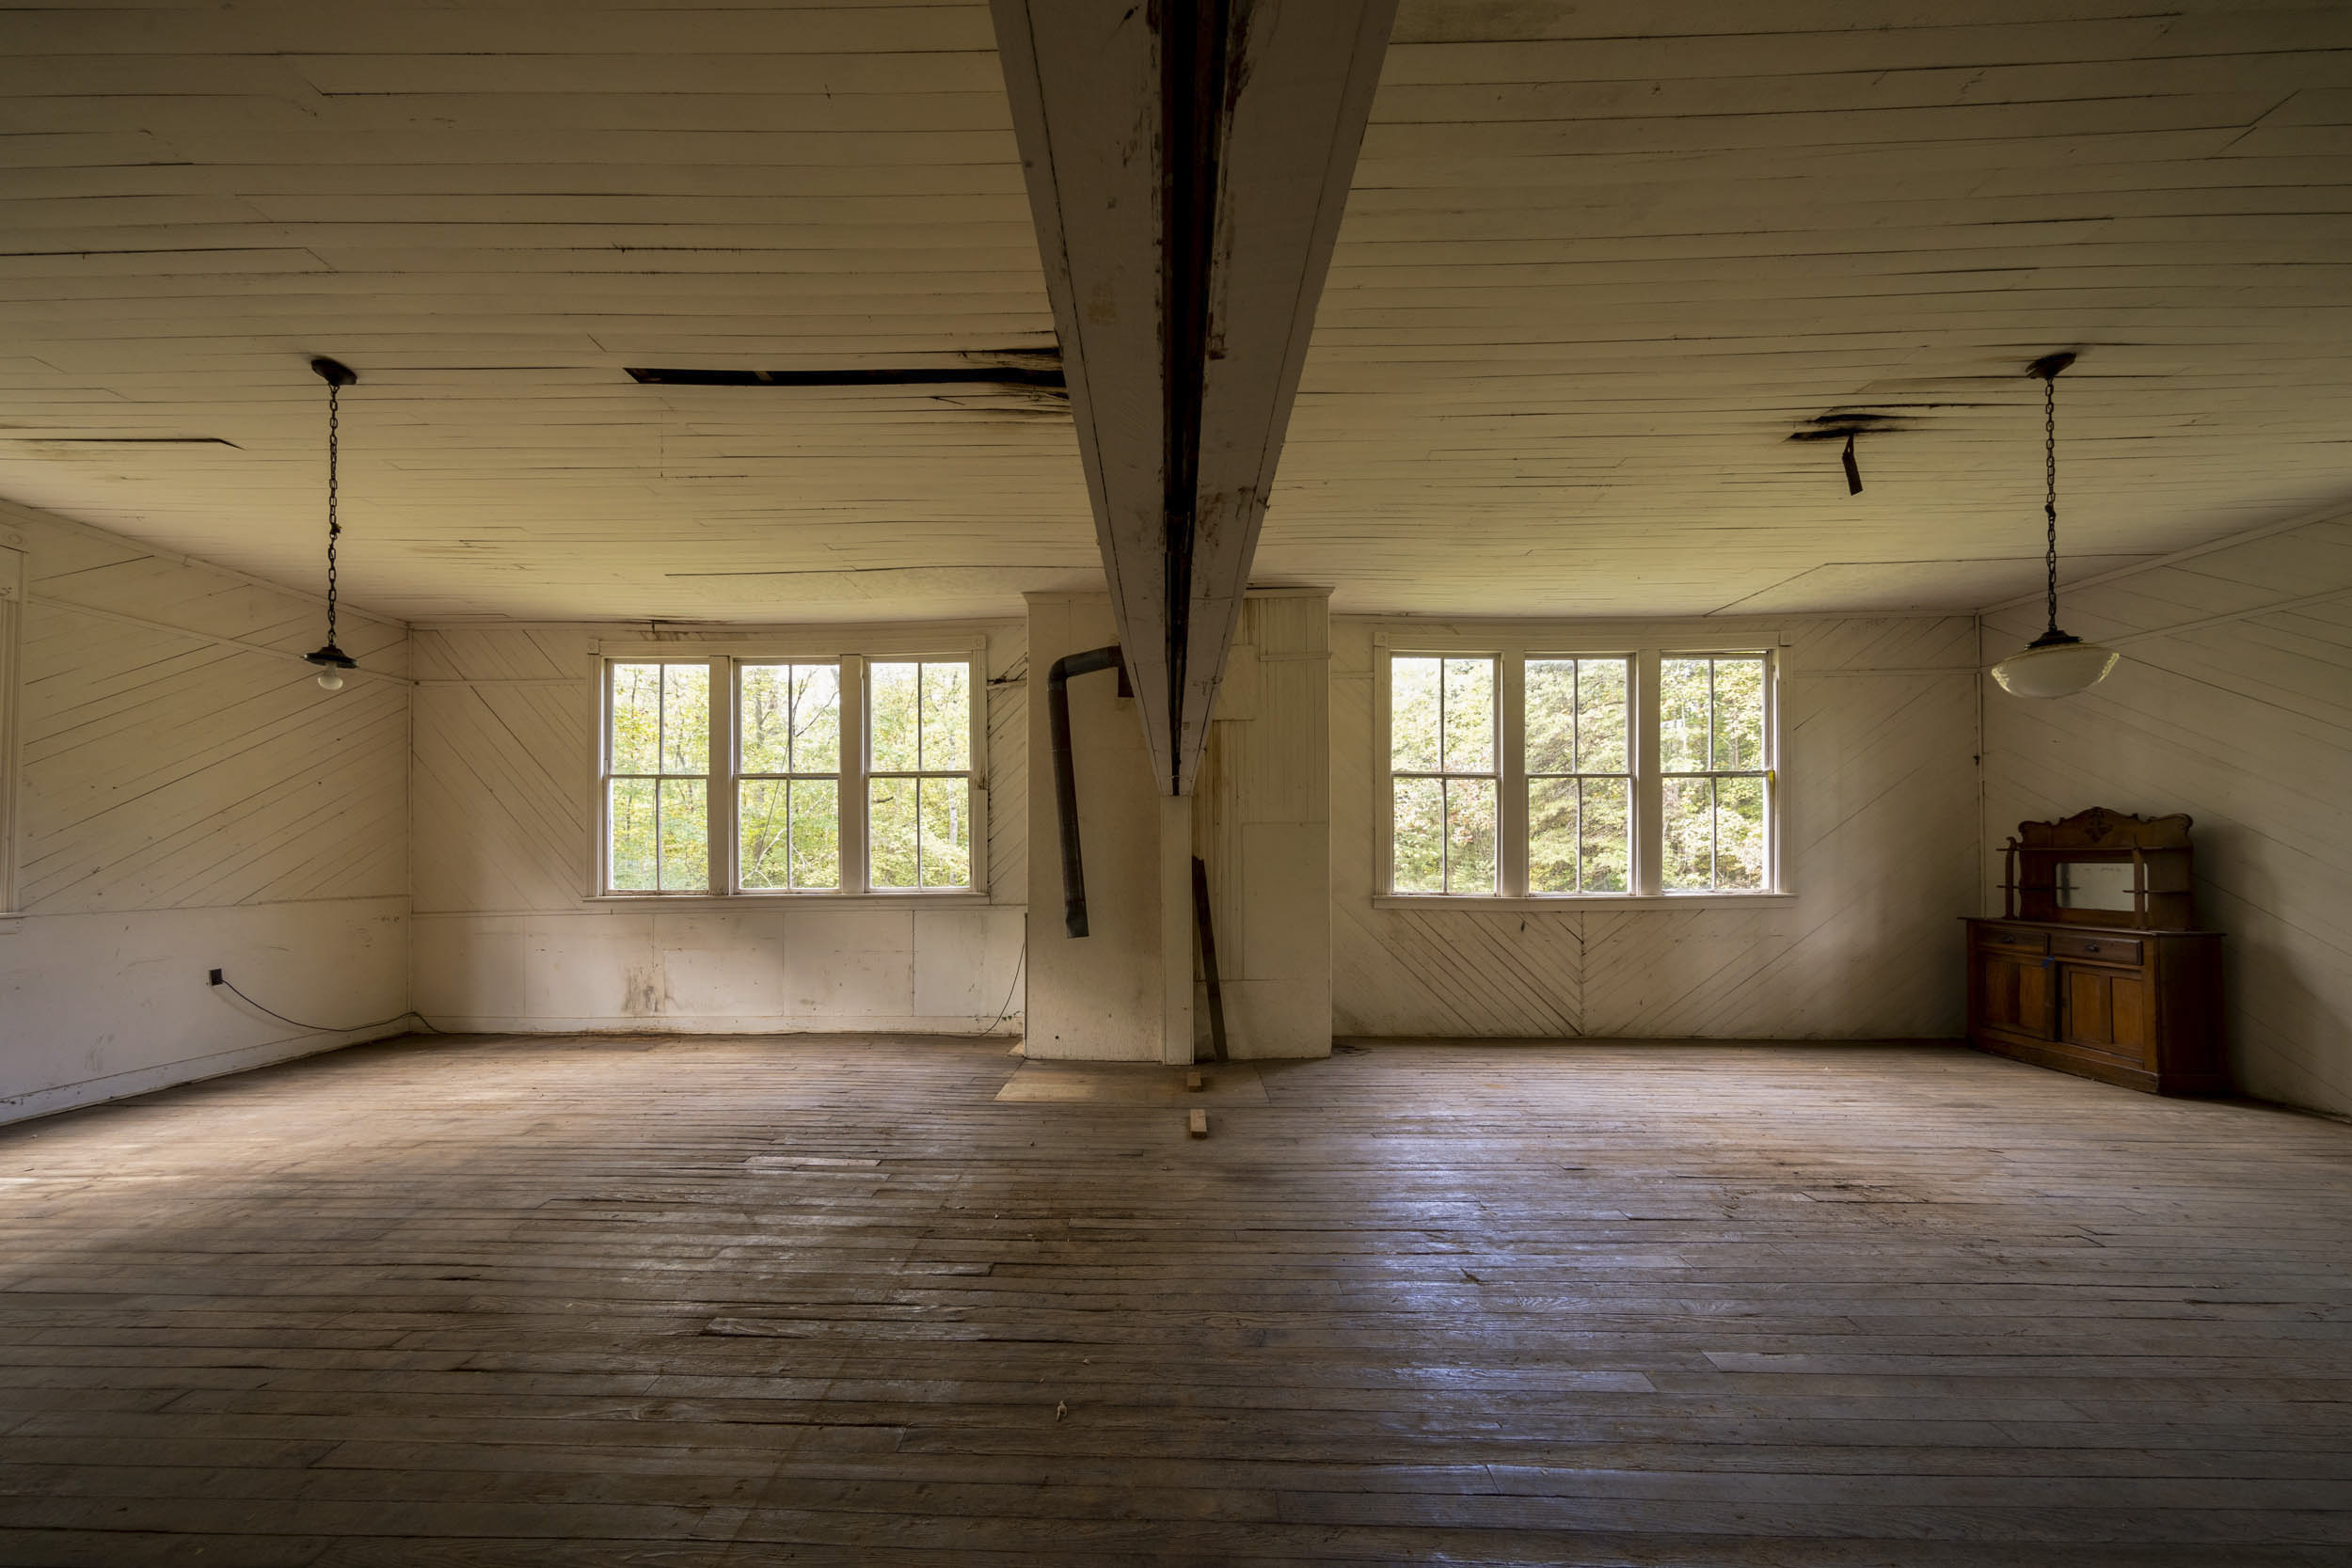 Inside view of the worn down Pine Grove School room